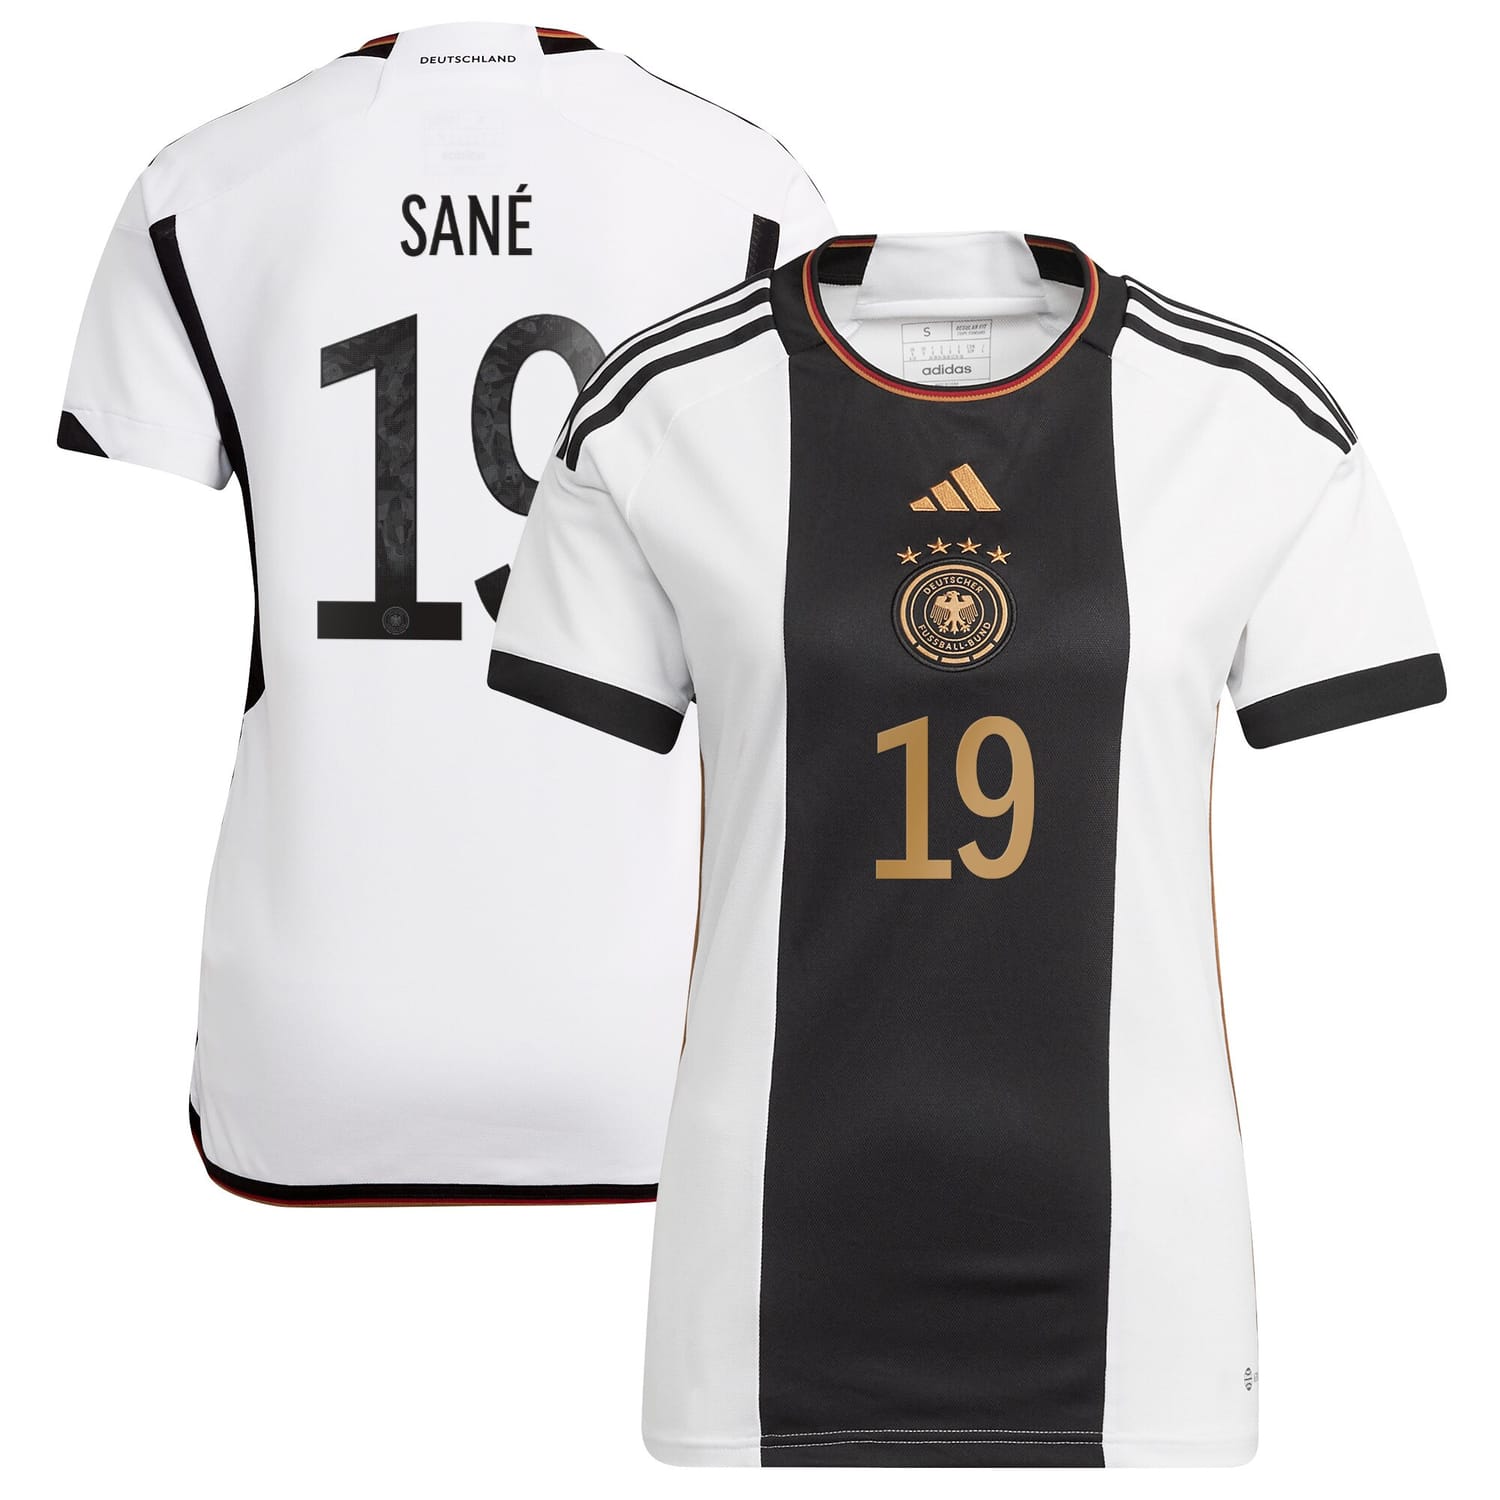 Germany National Team Home Jersey Shirt player Leroy Sané 19 printing for Women